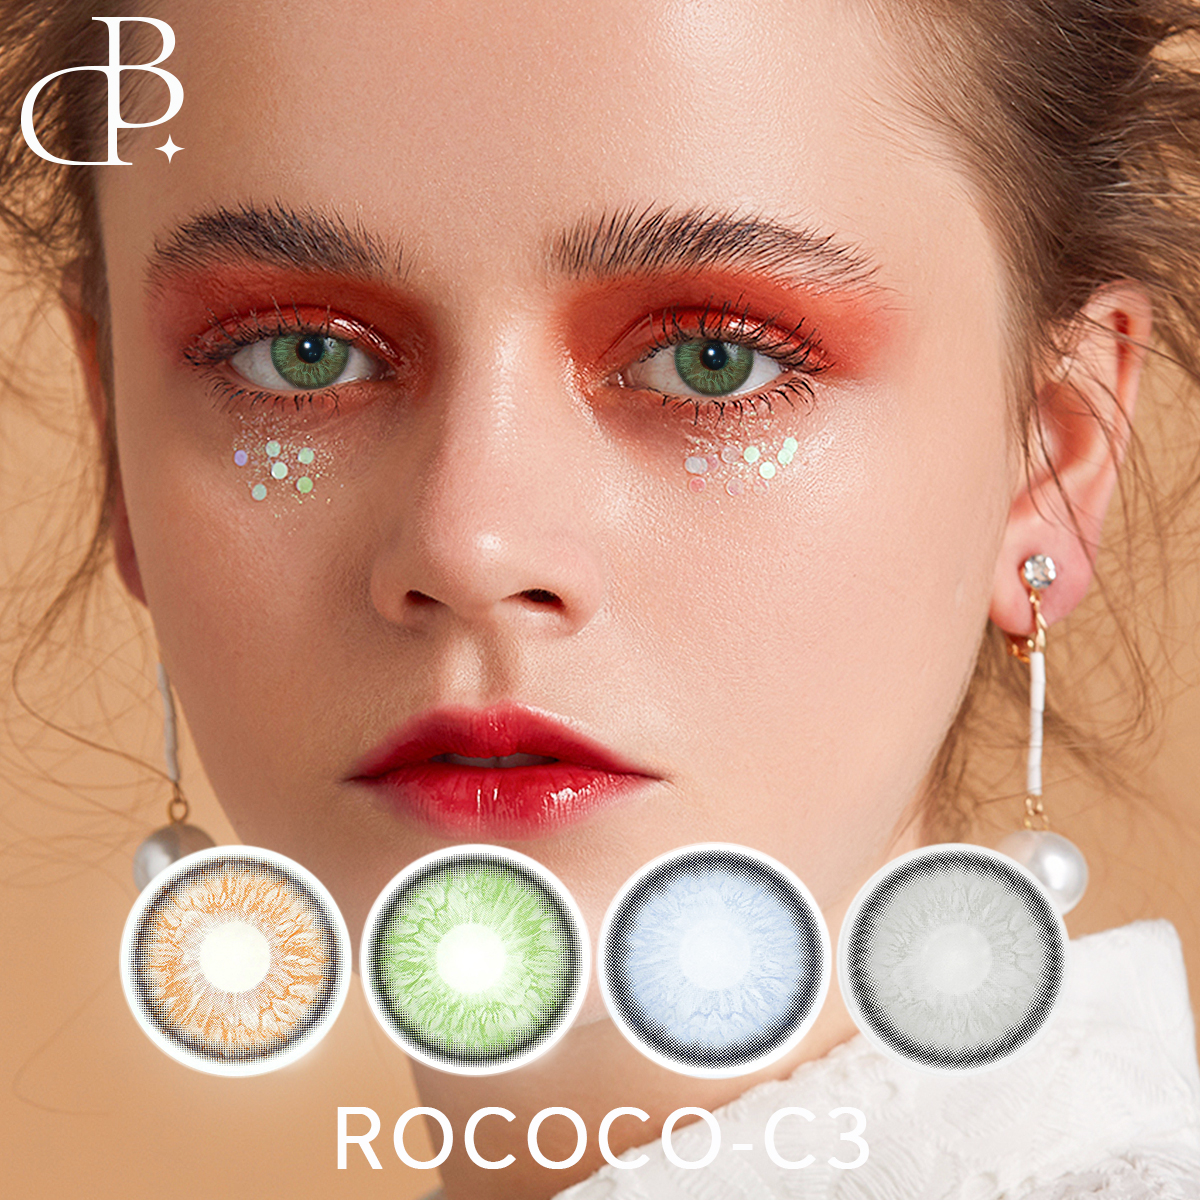 ROCOCO-3 series 1 taon factory color lens degree cosmetic colored eye contact lens na may box